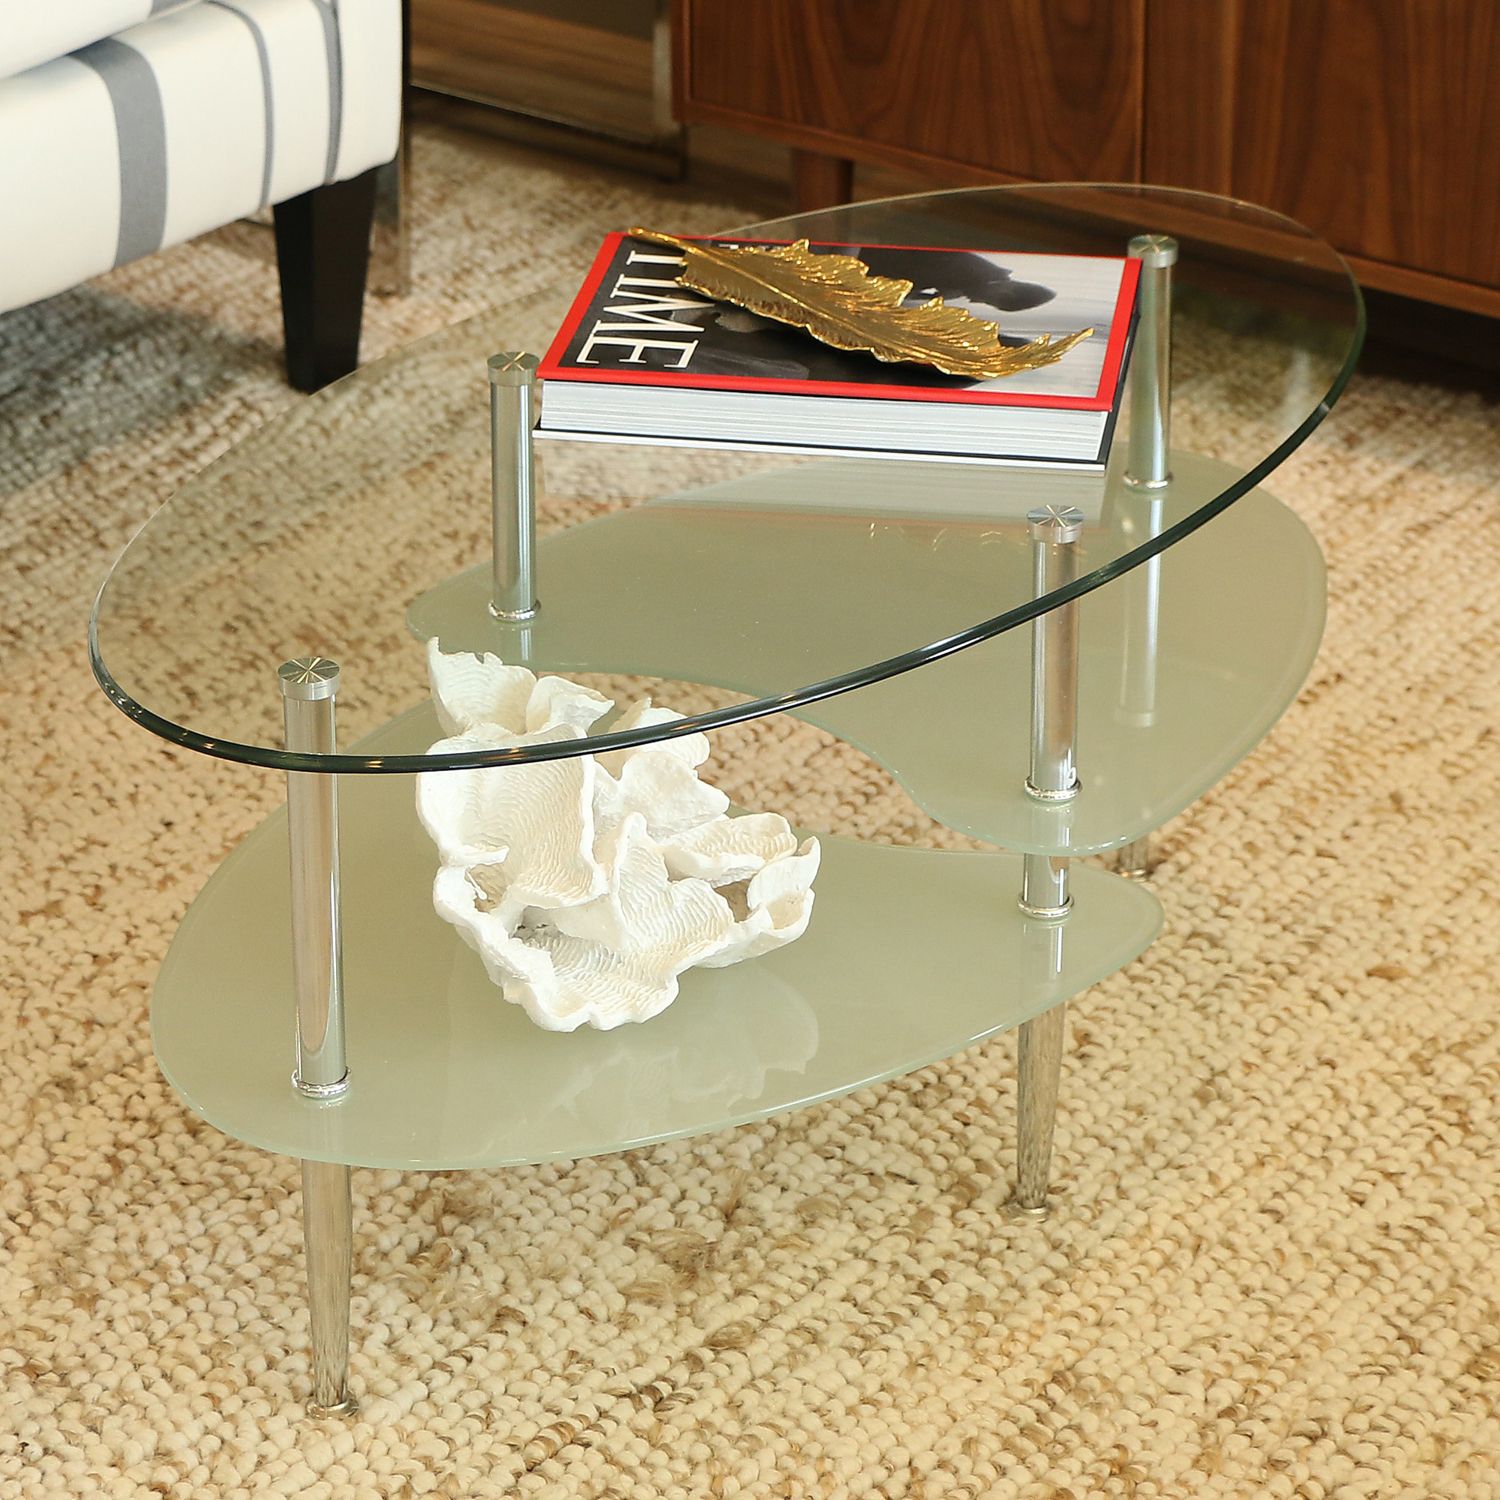 Oval Glass Coffee Table With Chrome Legs – Pier1 Imports Within Oval Glass Coffee Tables (View 8 of 20)